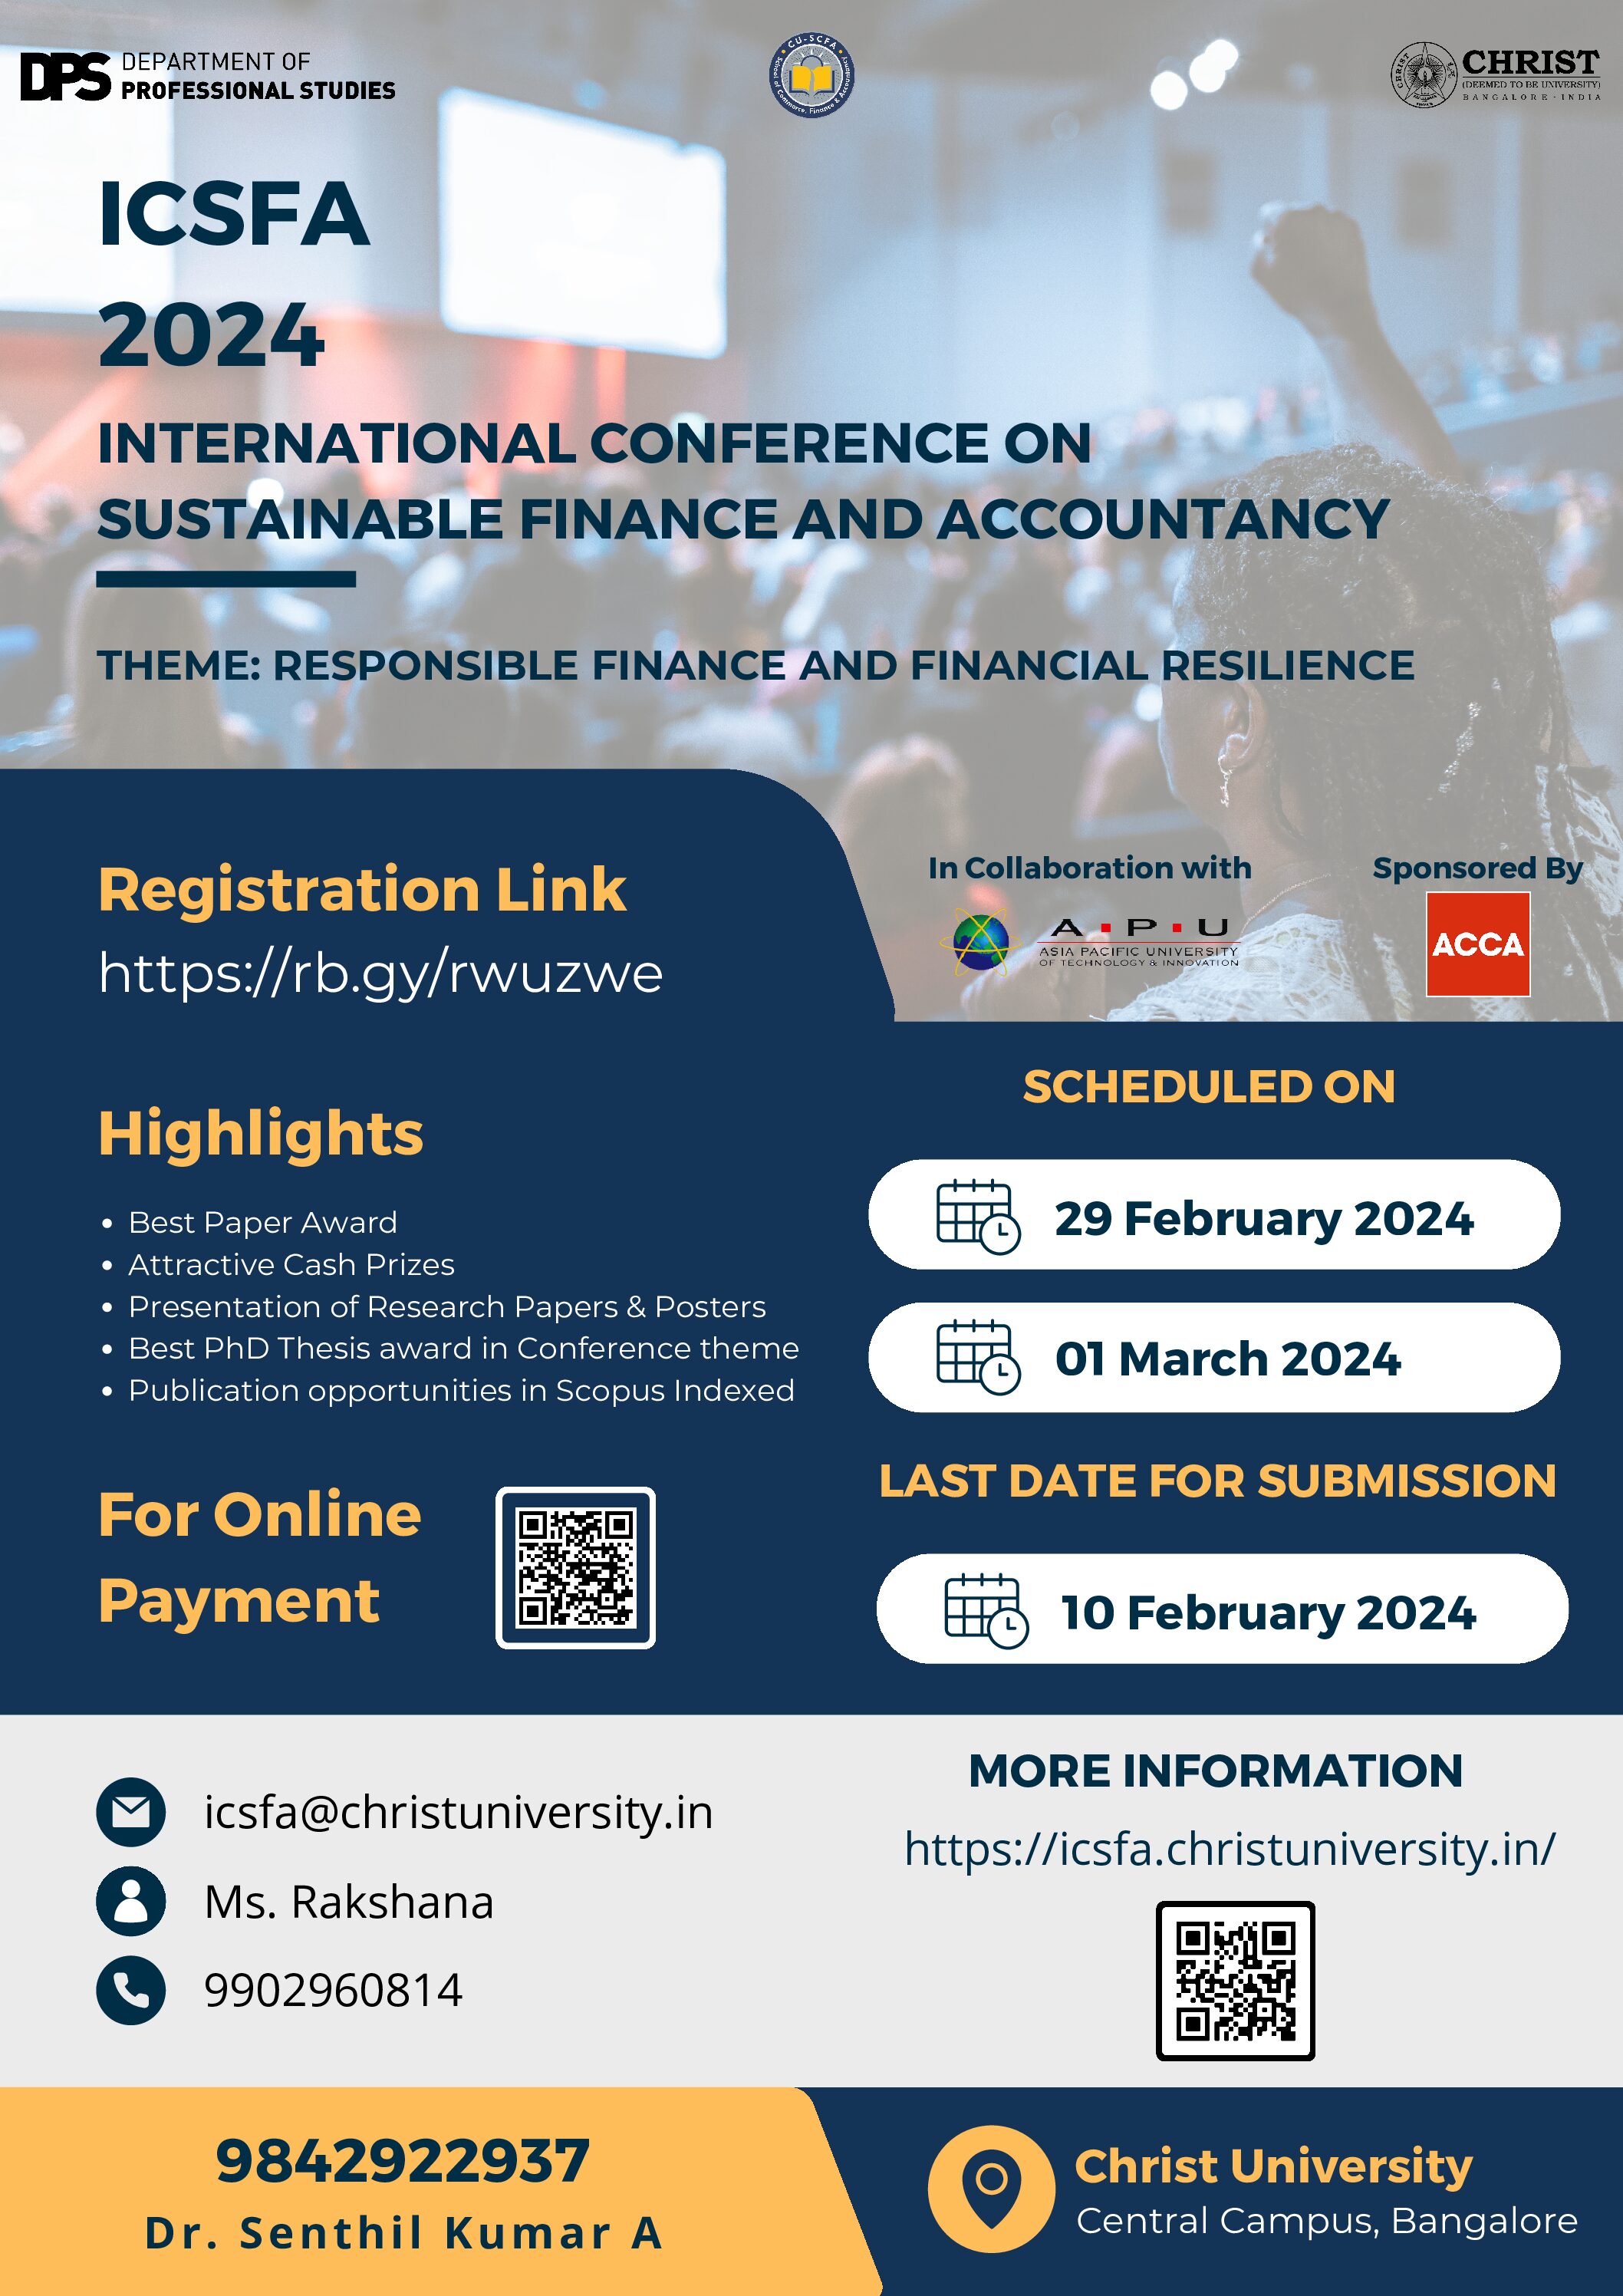 International Conference on Sustainable Finance and Accountancy